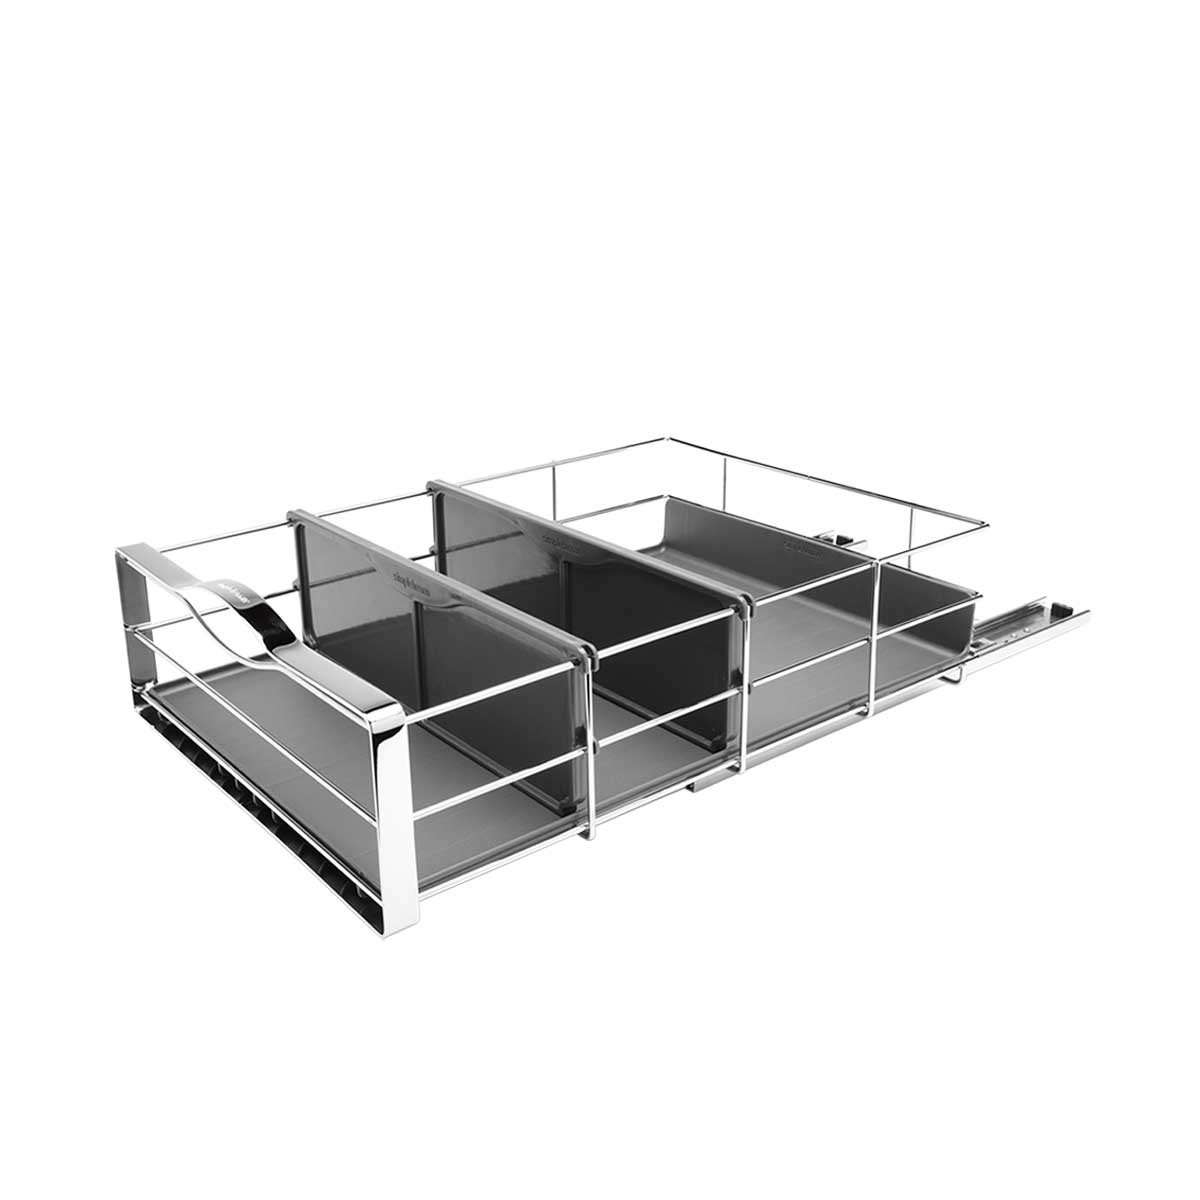 14-inch pull-out cabinet organizer product support